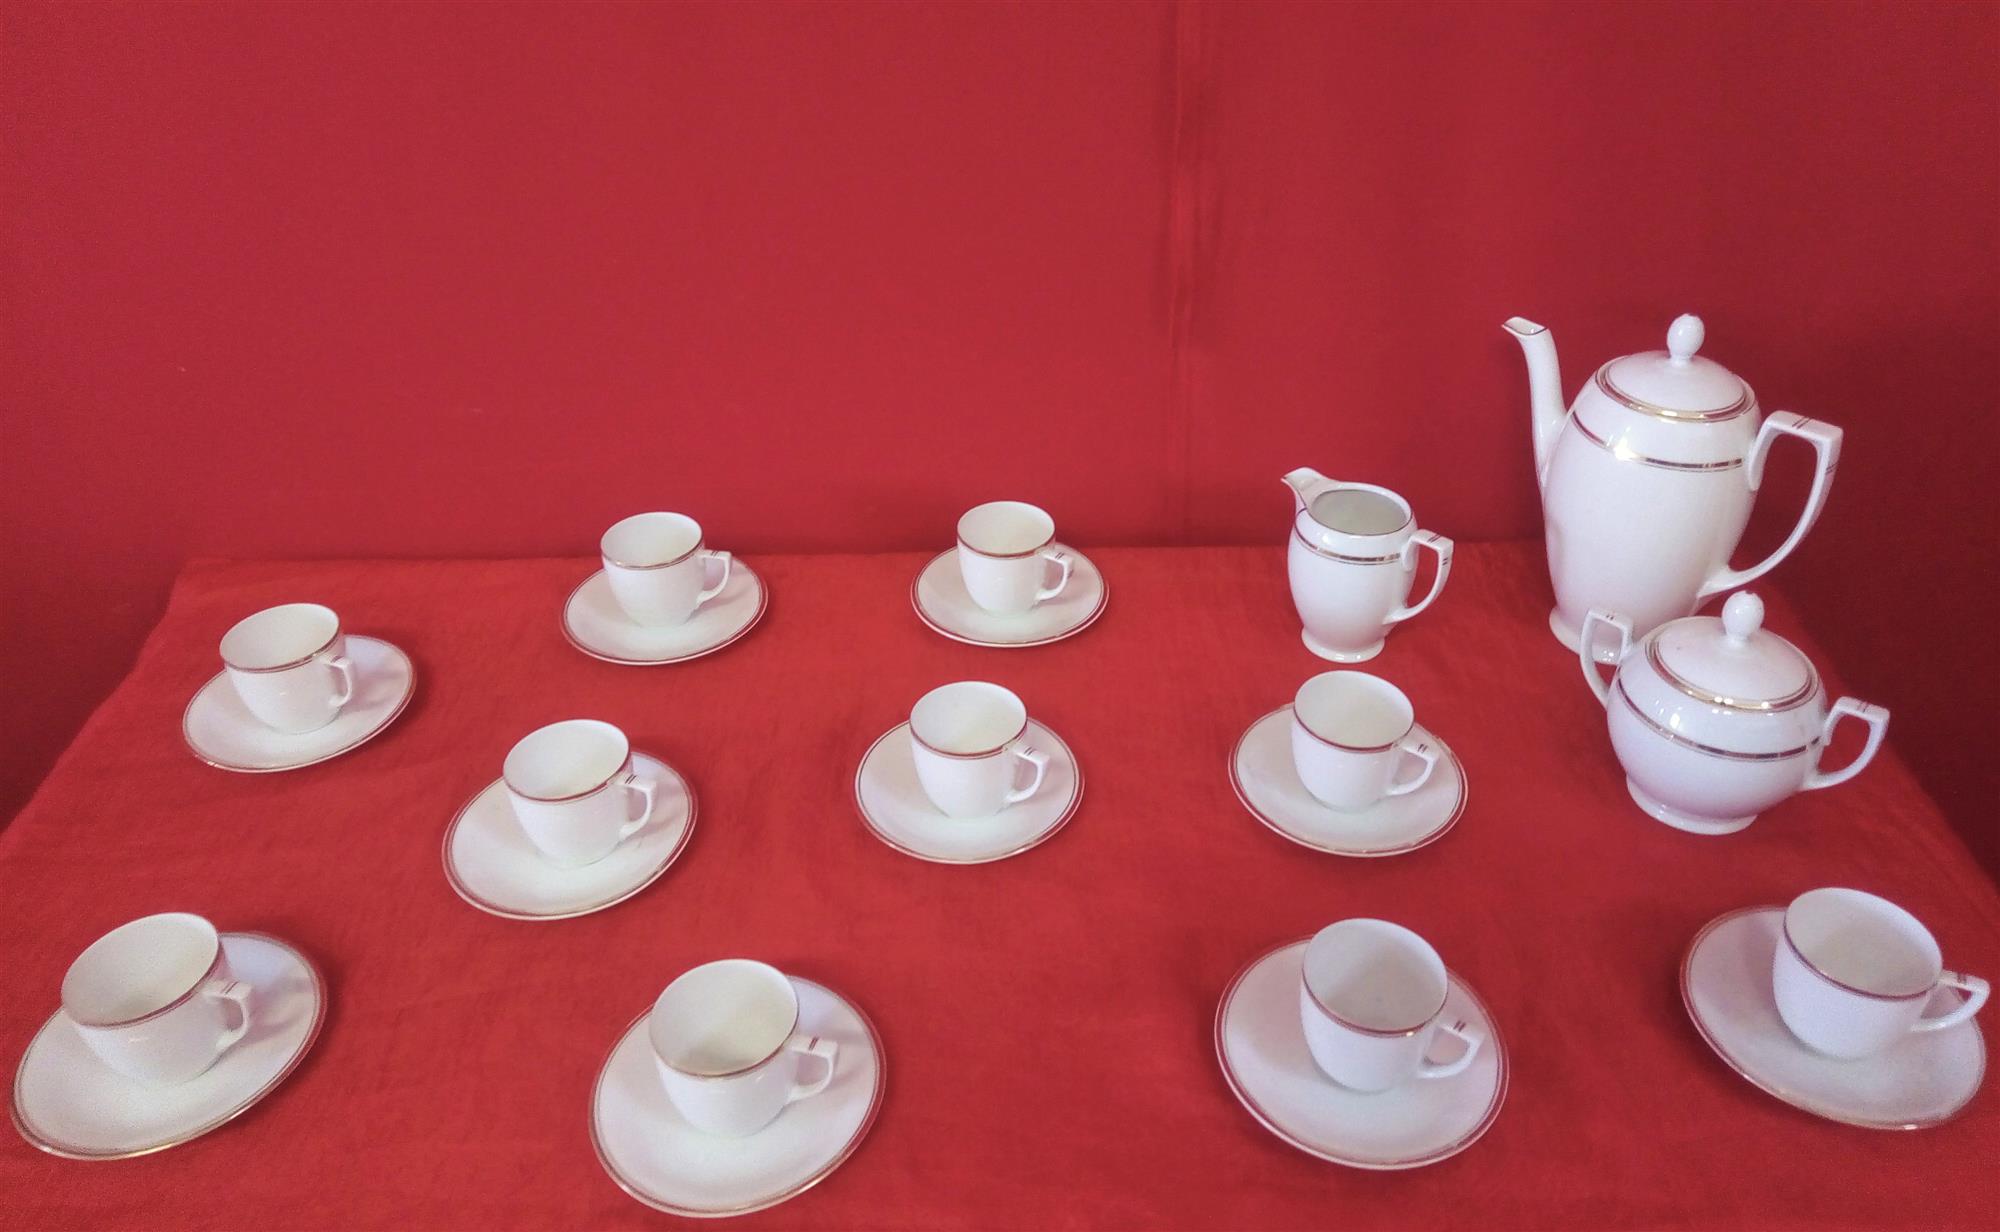 Coffee service with gold decorations 25 pieces